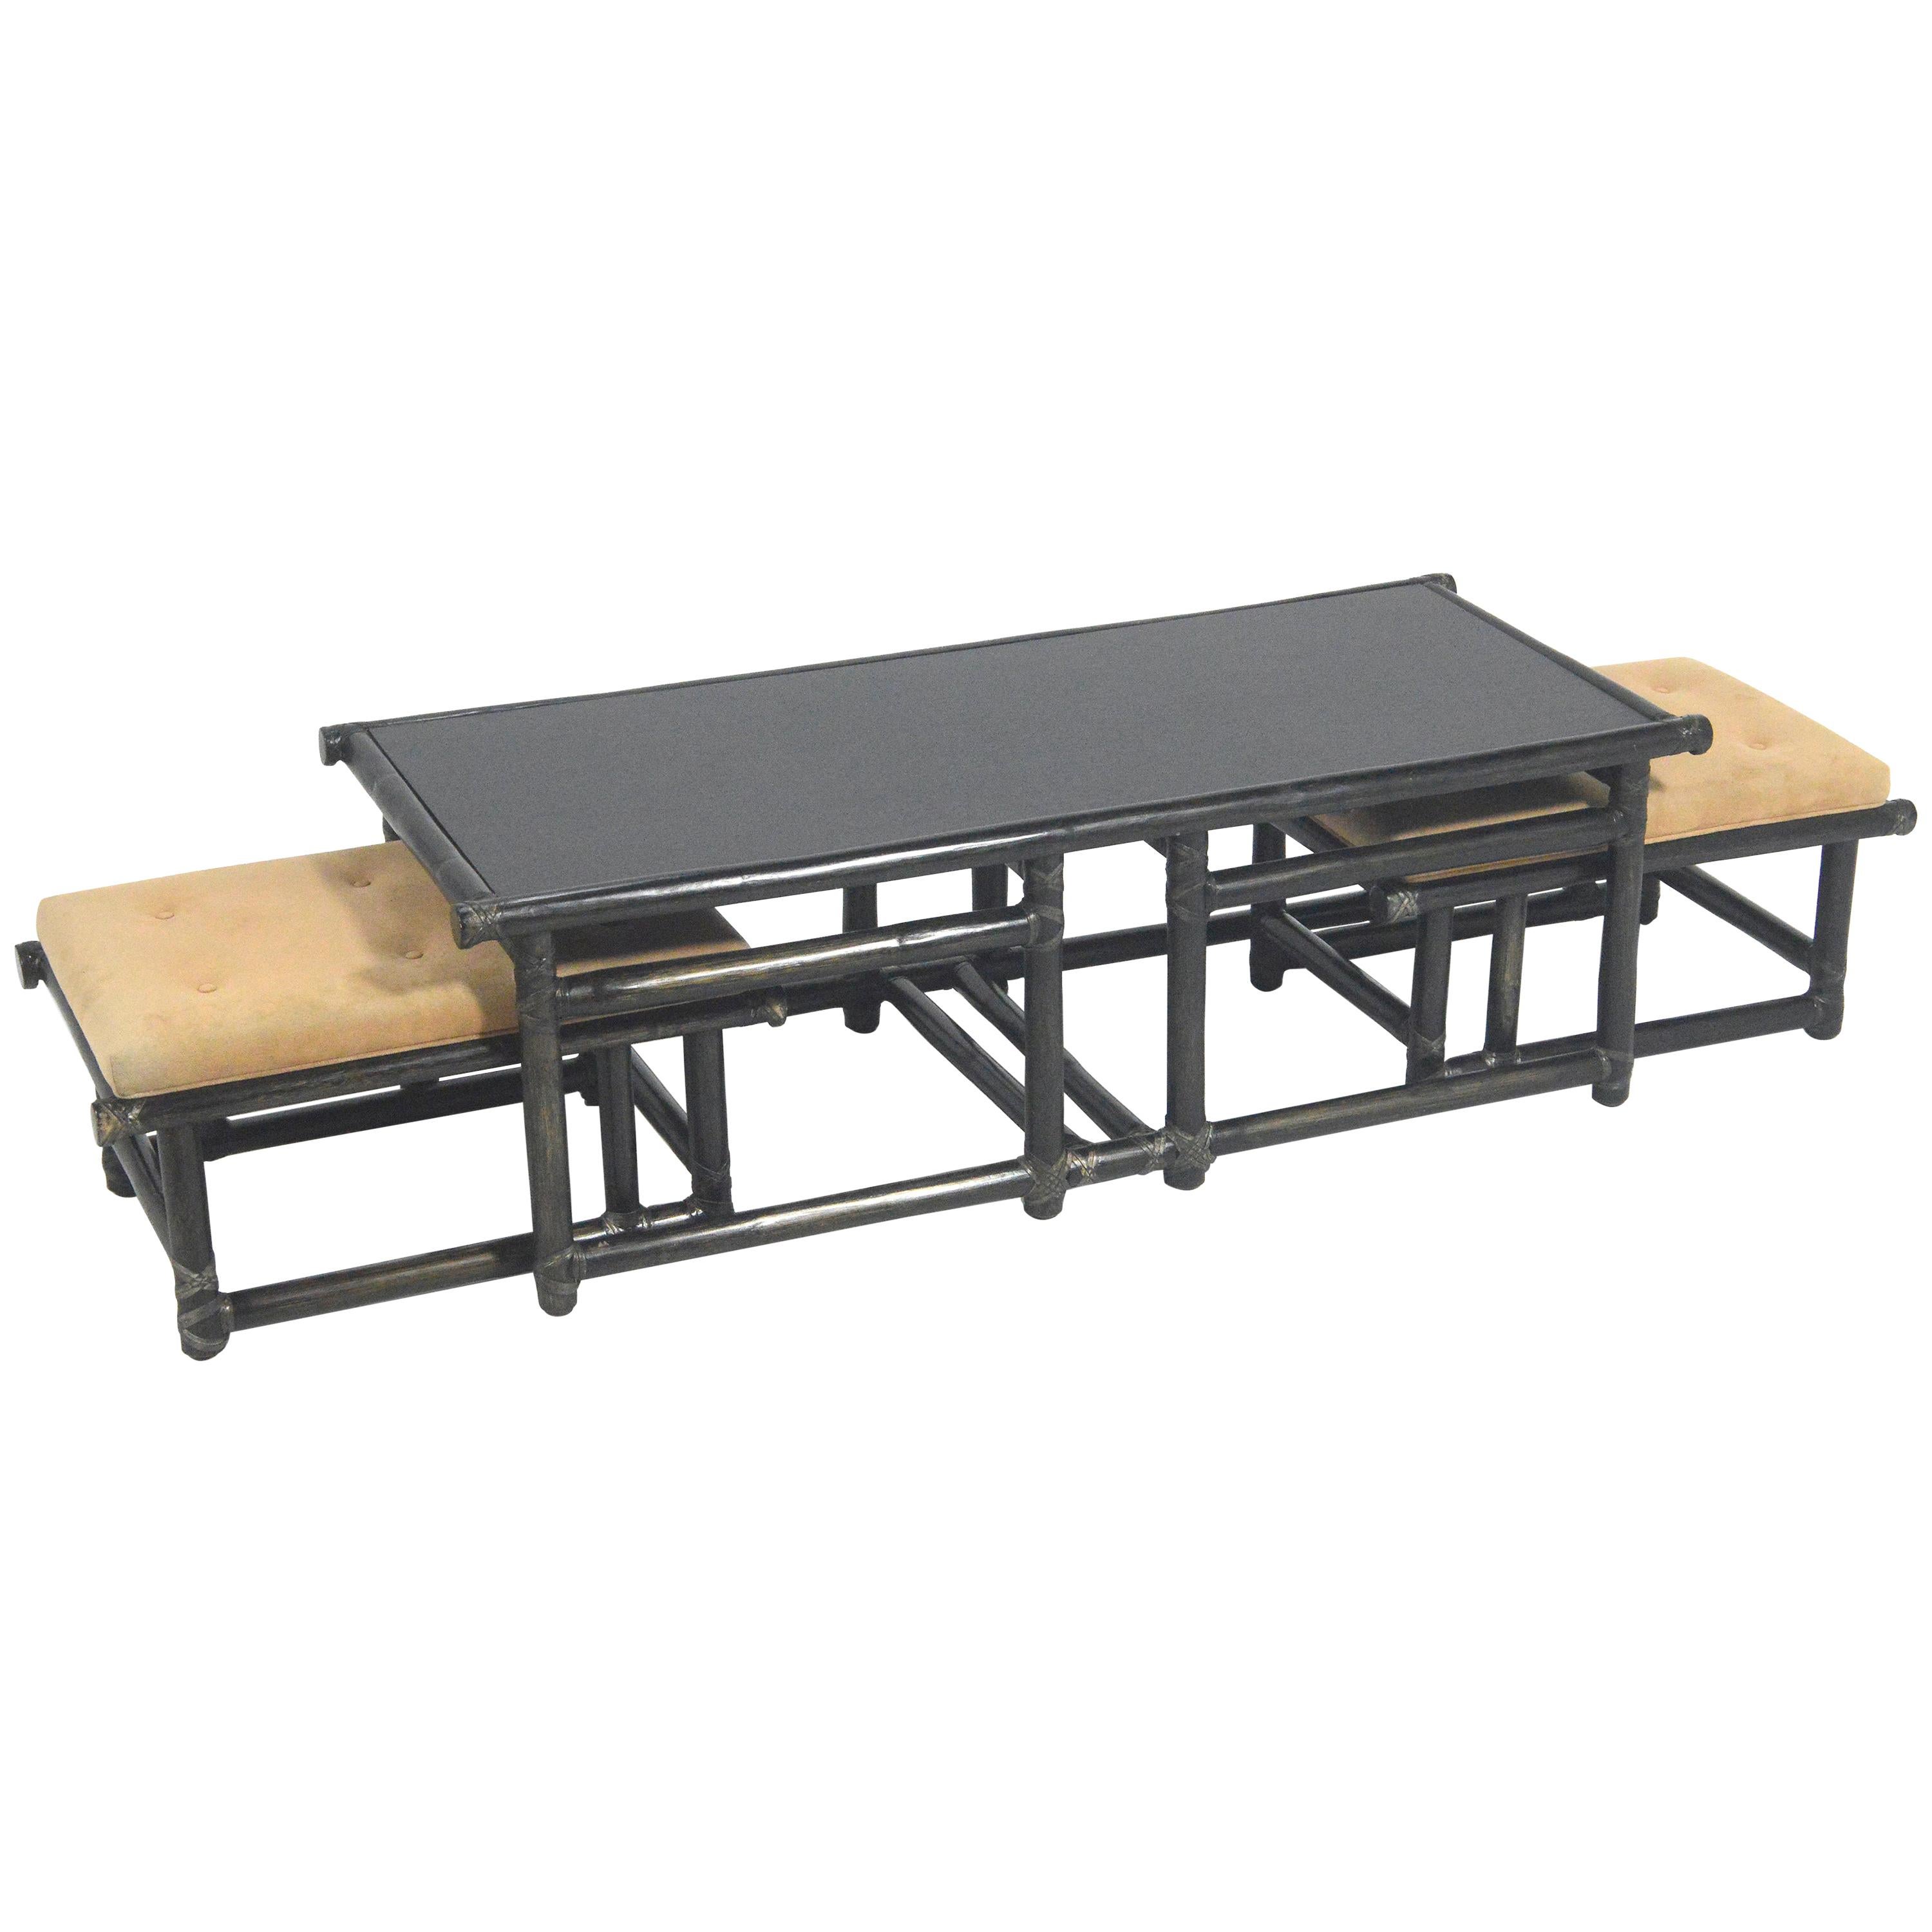 John McGuire Model 57-3 Table and Nesting Benches For Sale